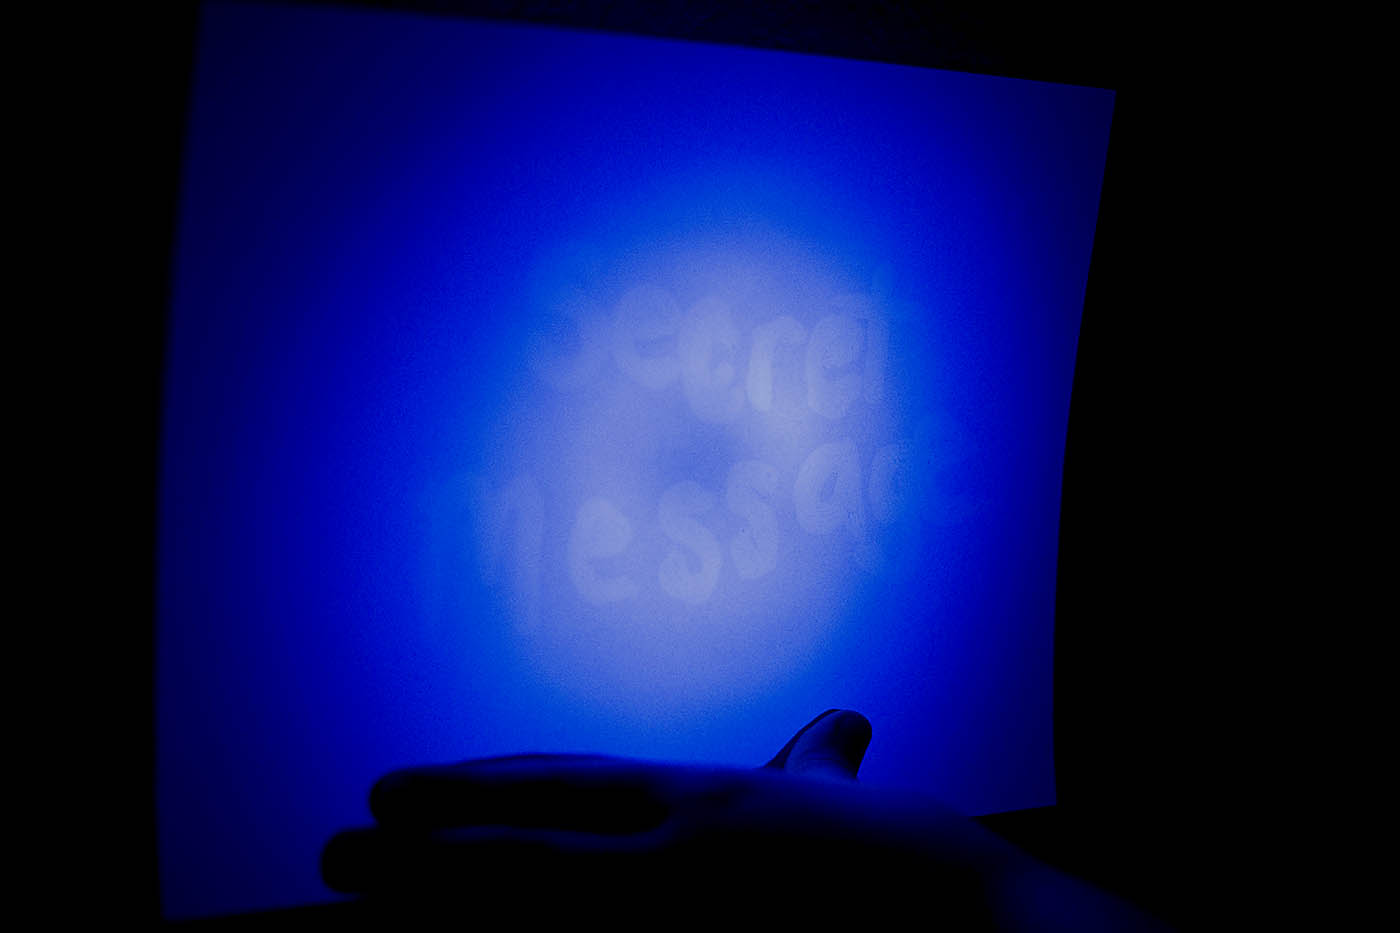 Secret glowing message using invisible ink